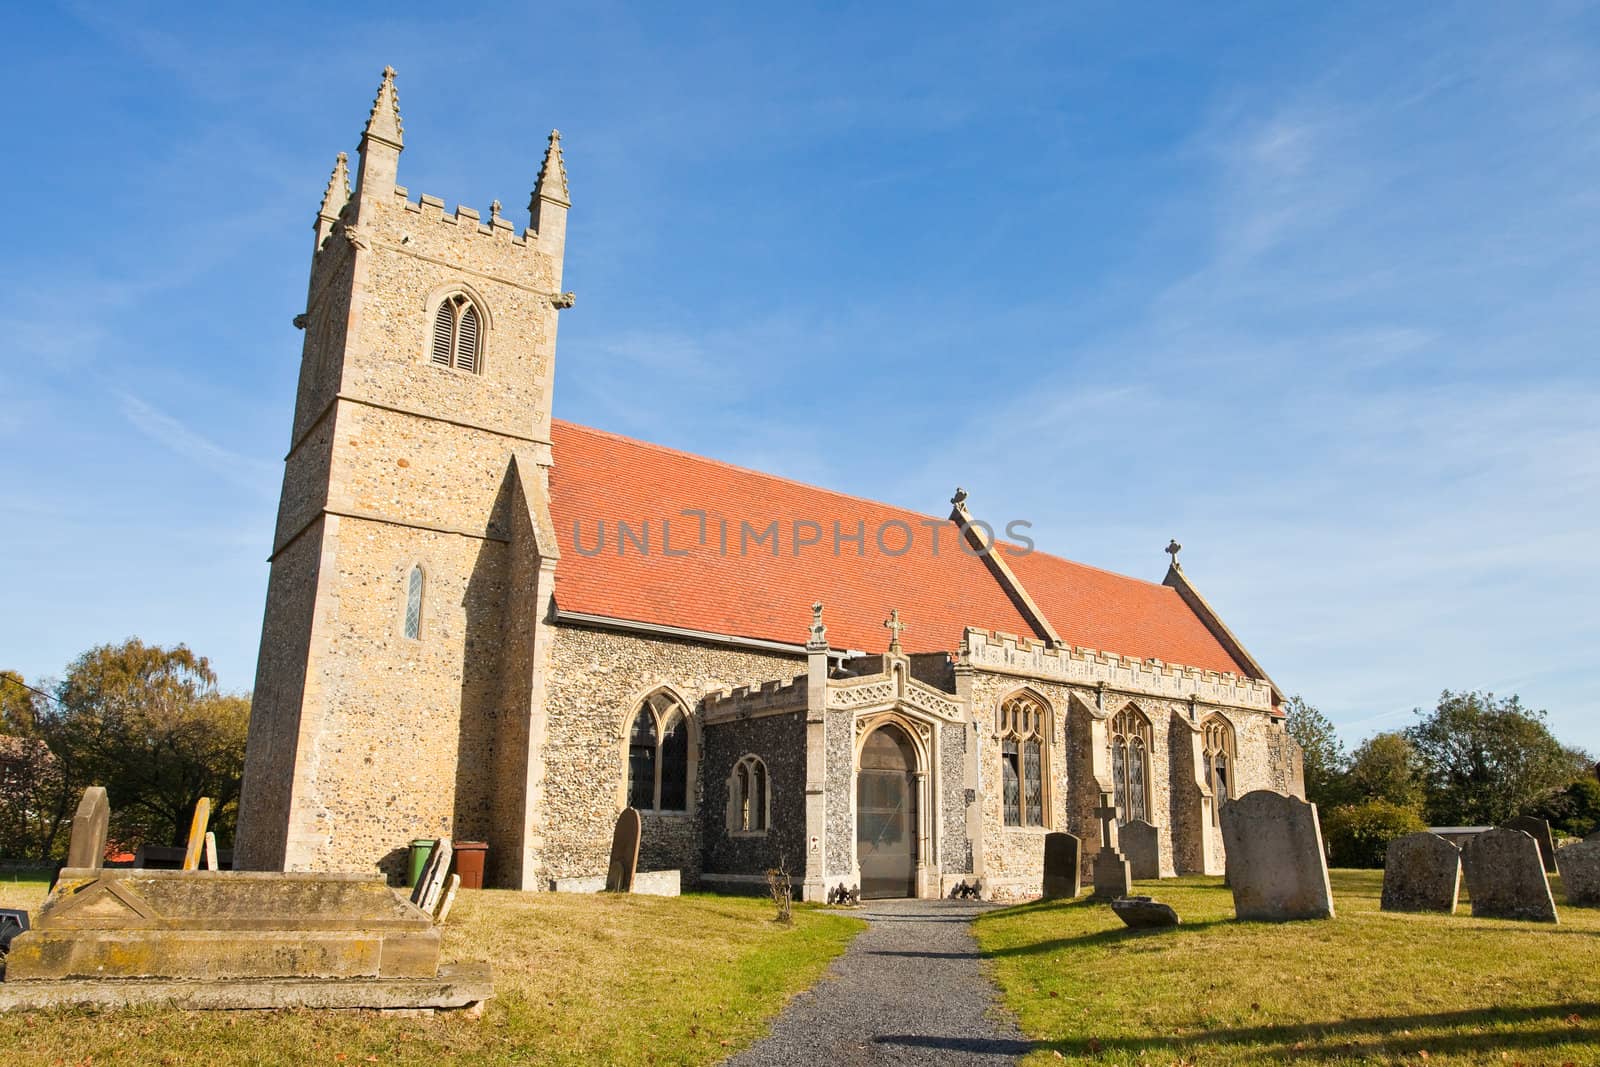 Old church in Fornham All Saints, a small village in Suffolk, England